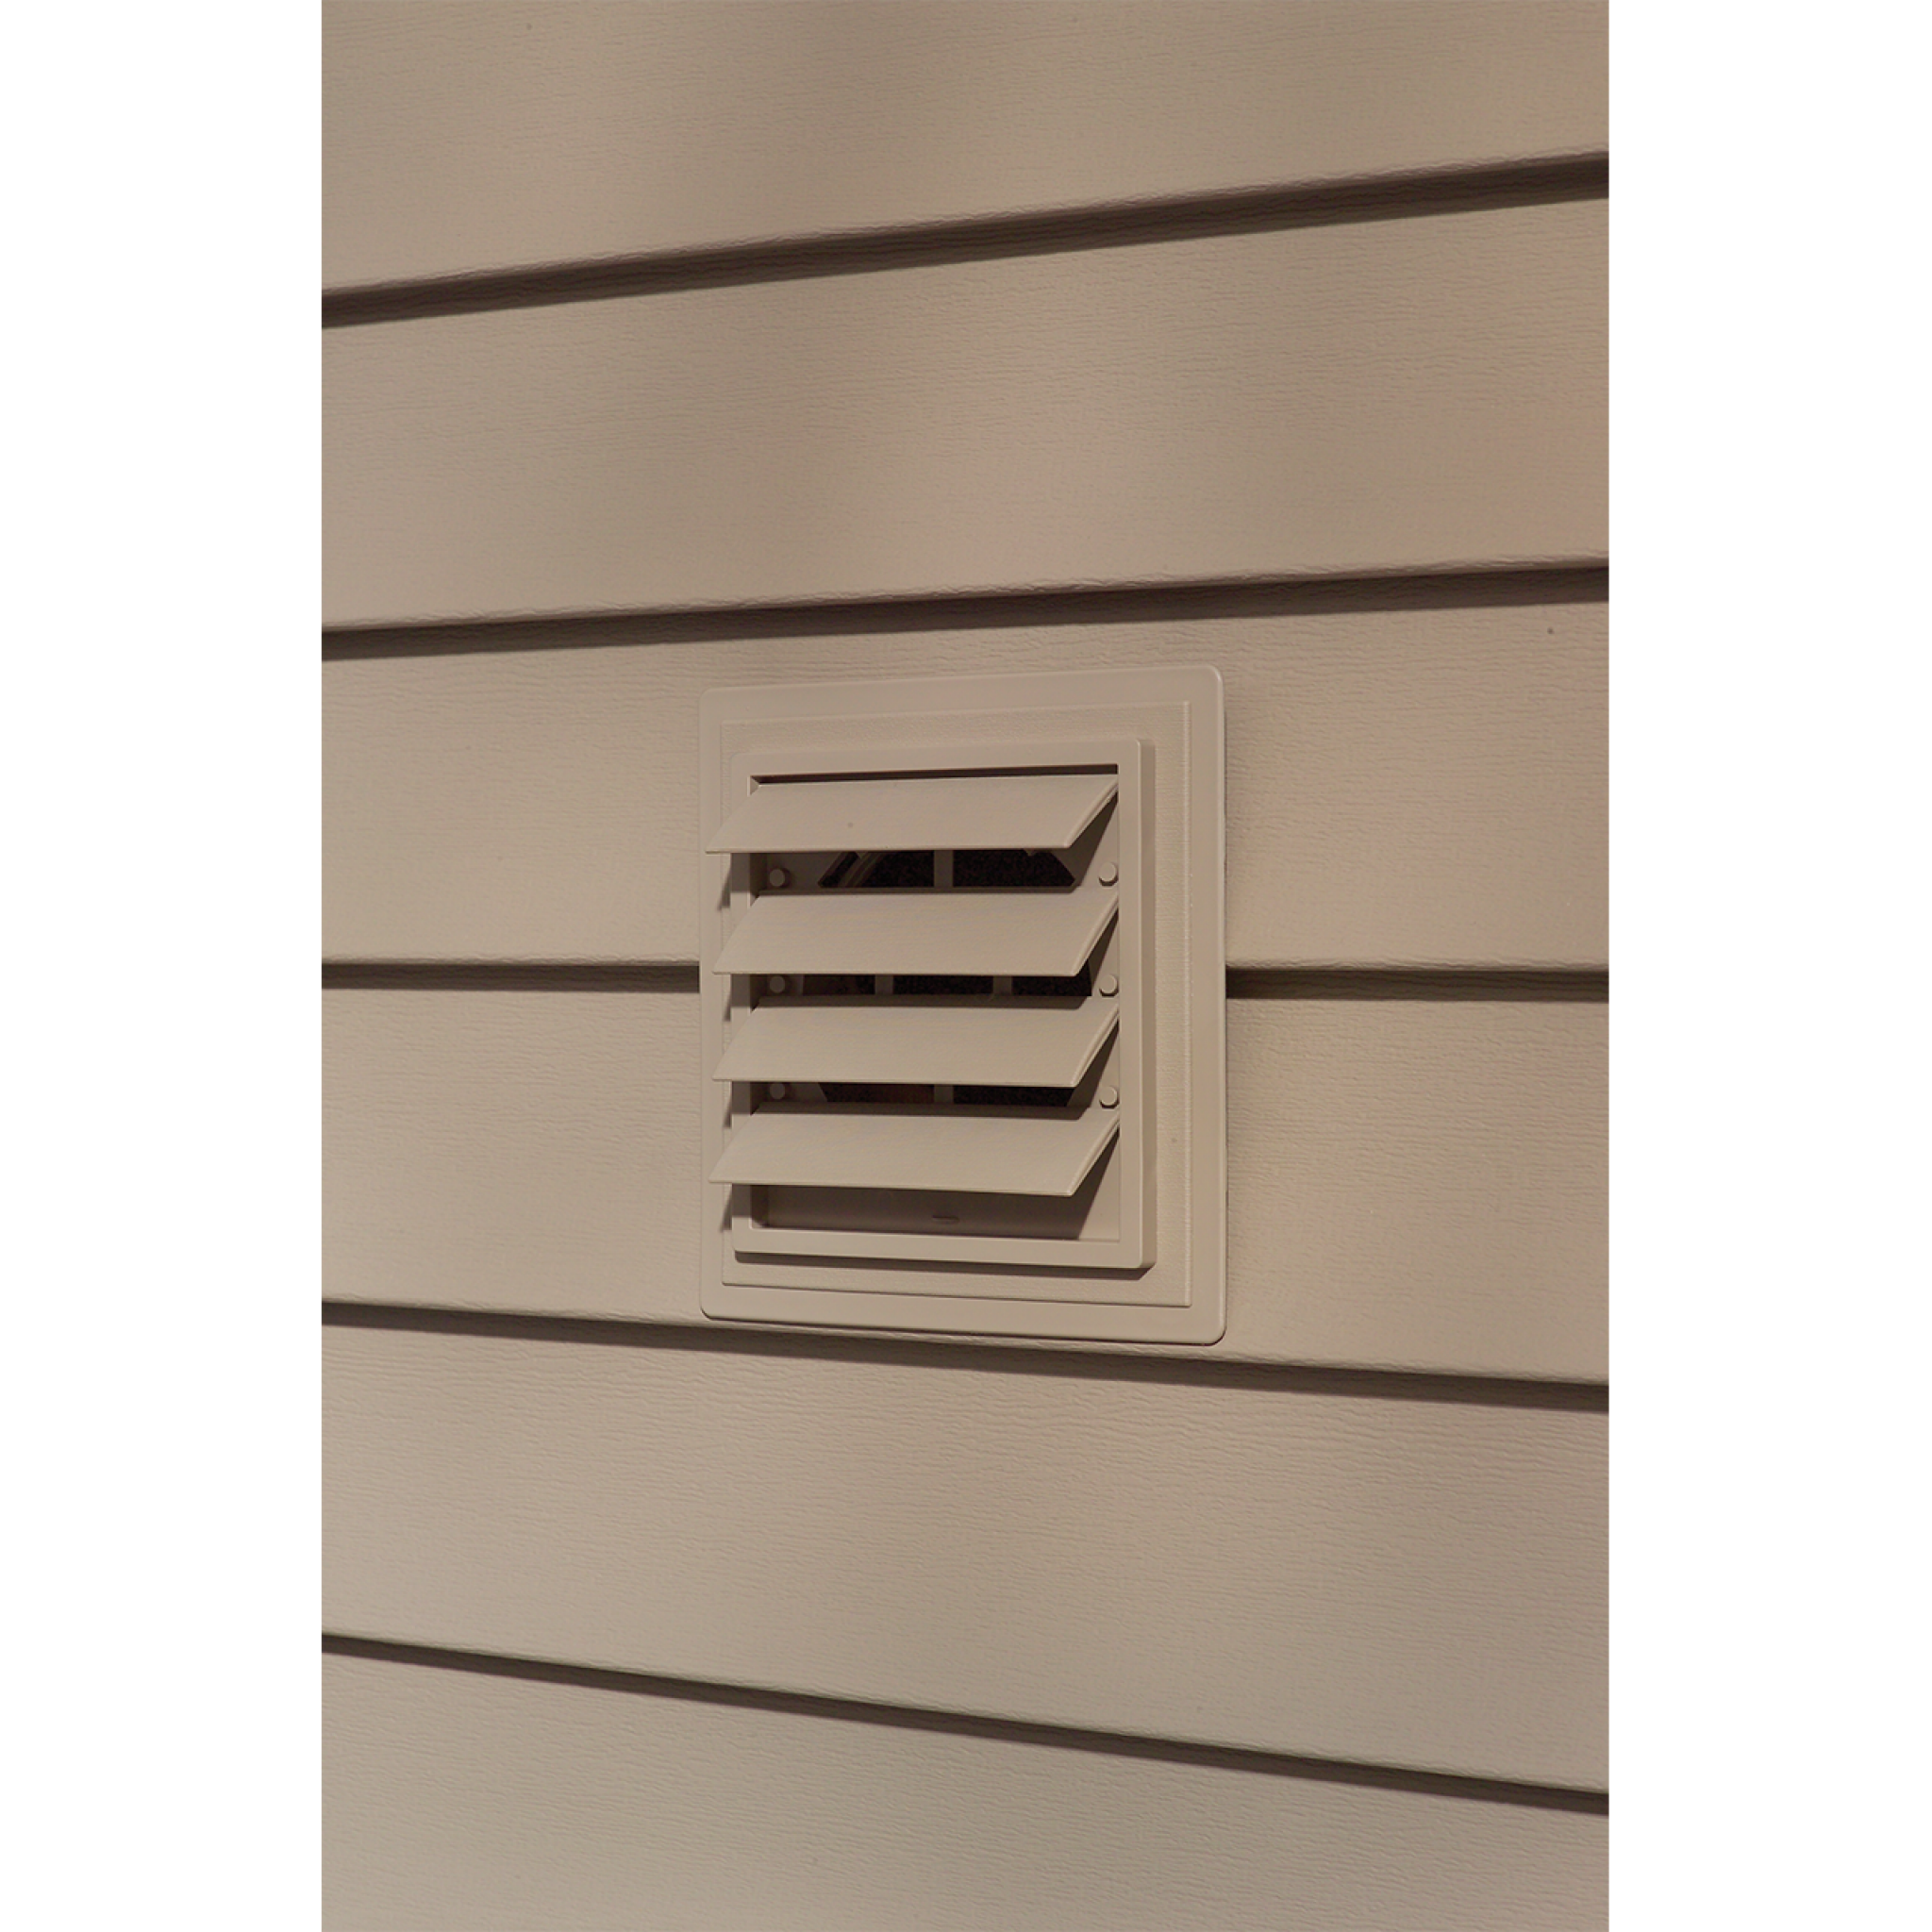 6" Louvered Exhaust Vent